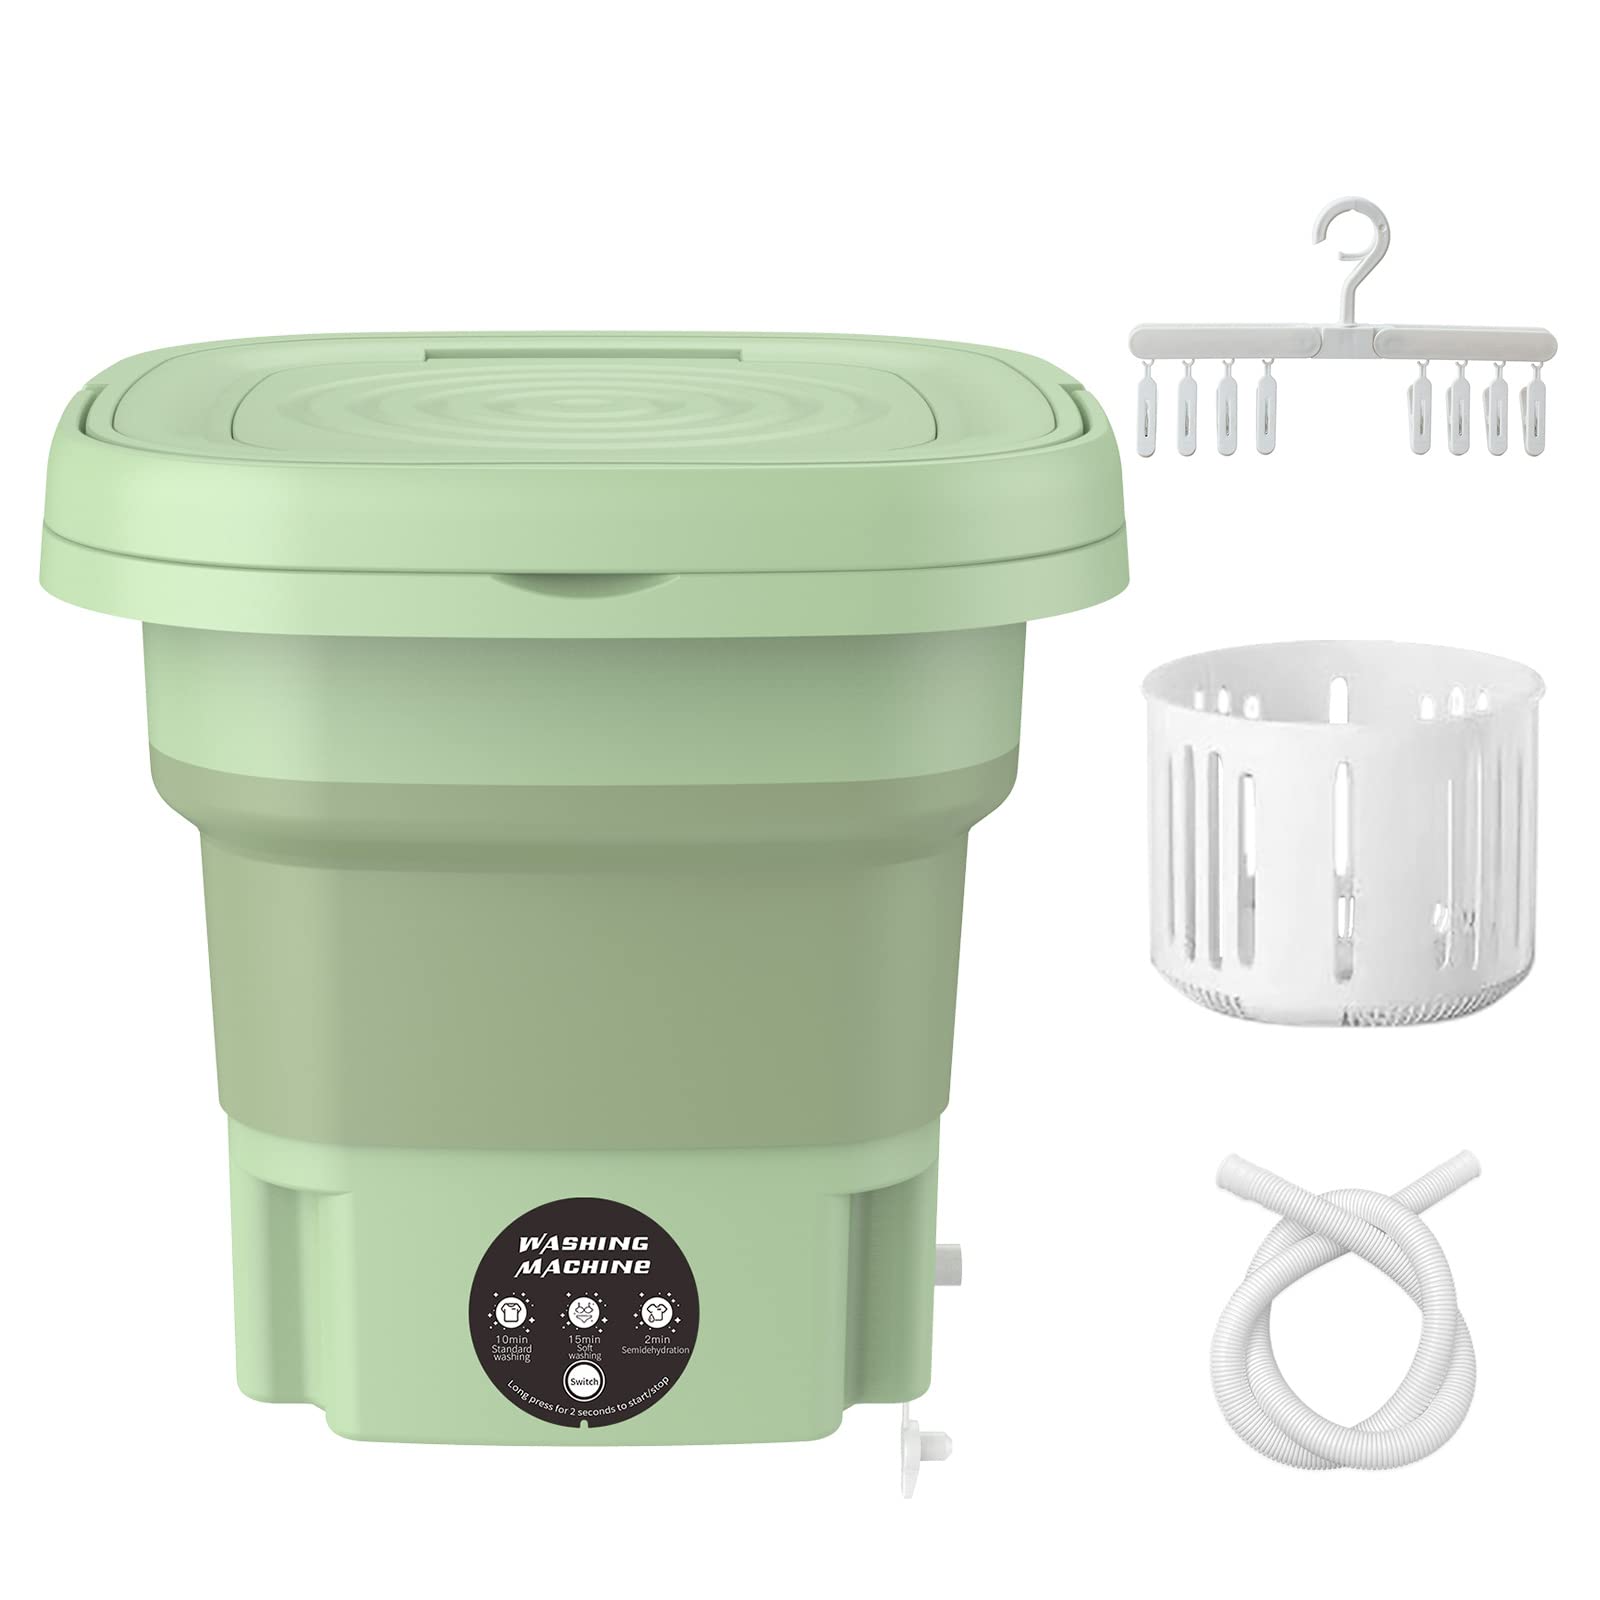 Portable Washing Machine,Foldable Mini Washing Machine,Portable Washer for Underwear,Socks,Baby Clothes,Towels,Pet Items,Apartment,Hotel,RV,Travel,Home,Dormitory,Camping,Sickroom,8L,Green